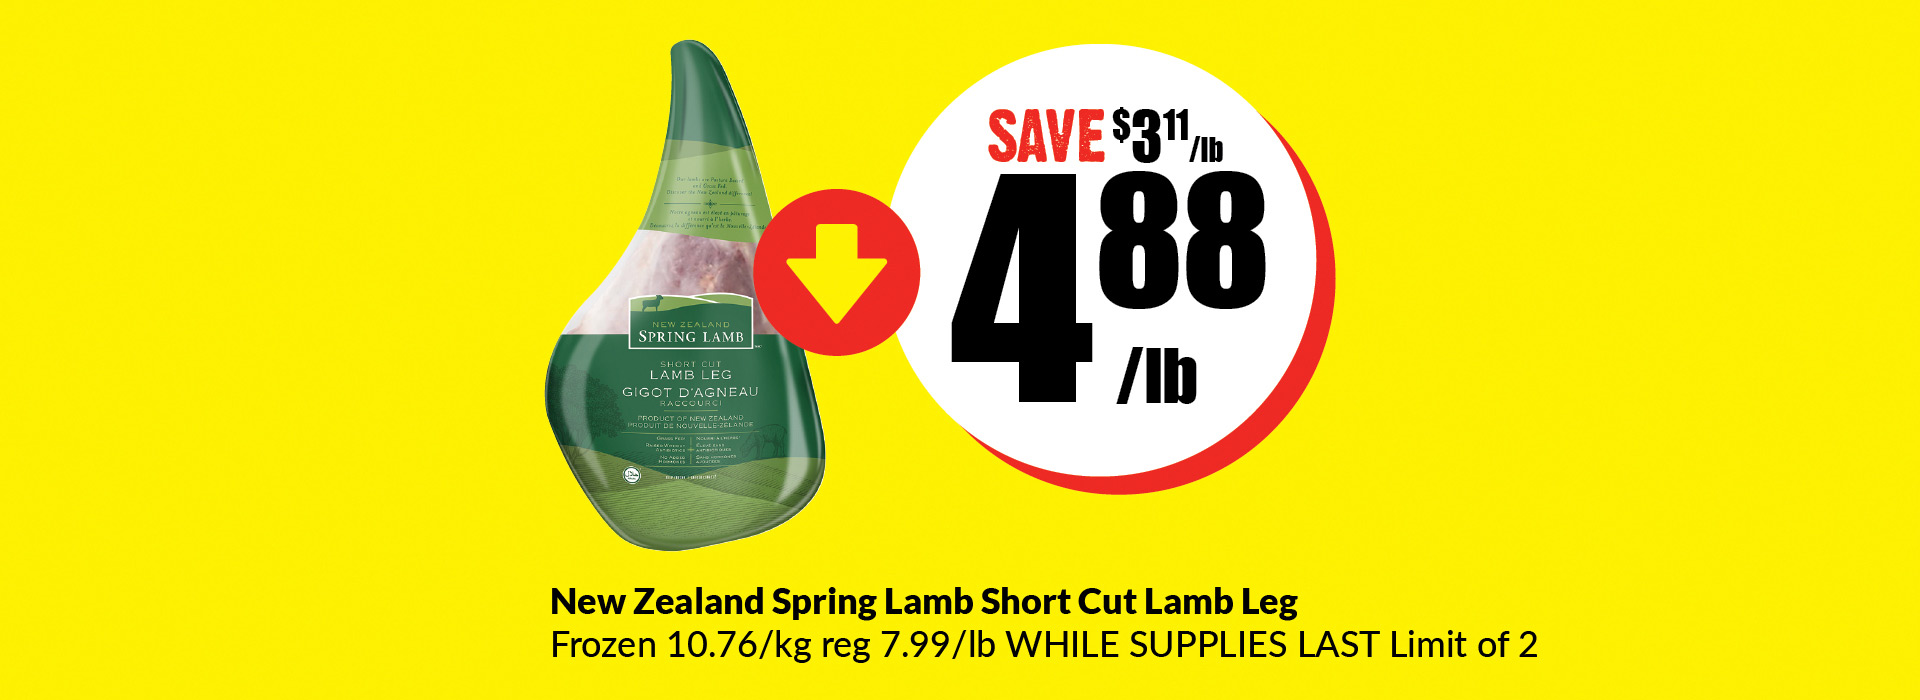 Text Reading â€œBuy New Zealand Spring Lamb Short Cut Lamb Leg Frozen 10.76 per kg at $4.88 per pound and save $3.11 per pound. The regular price is $7.99 per pound. While supplies last limit of 2â€